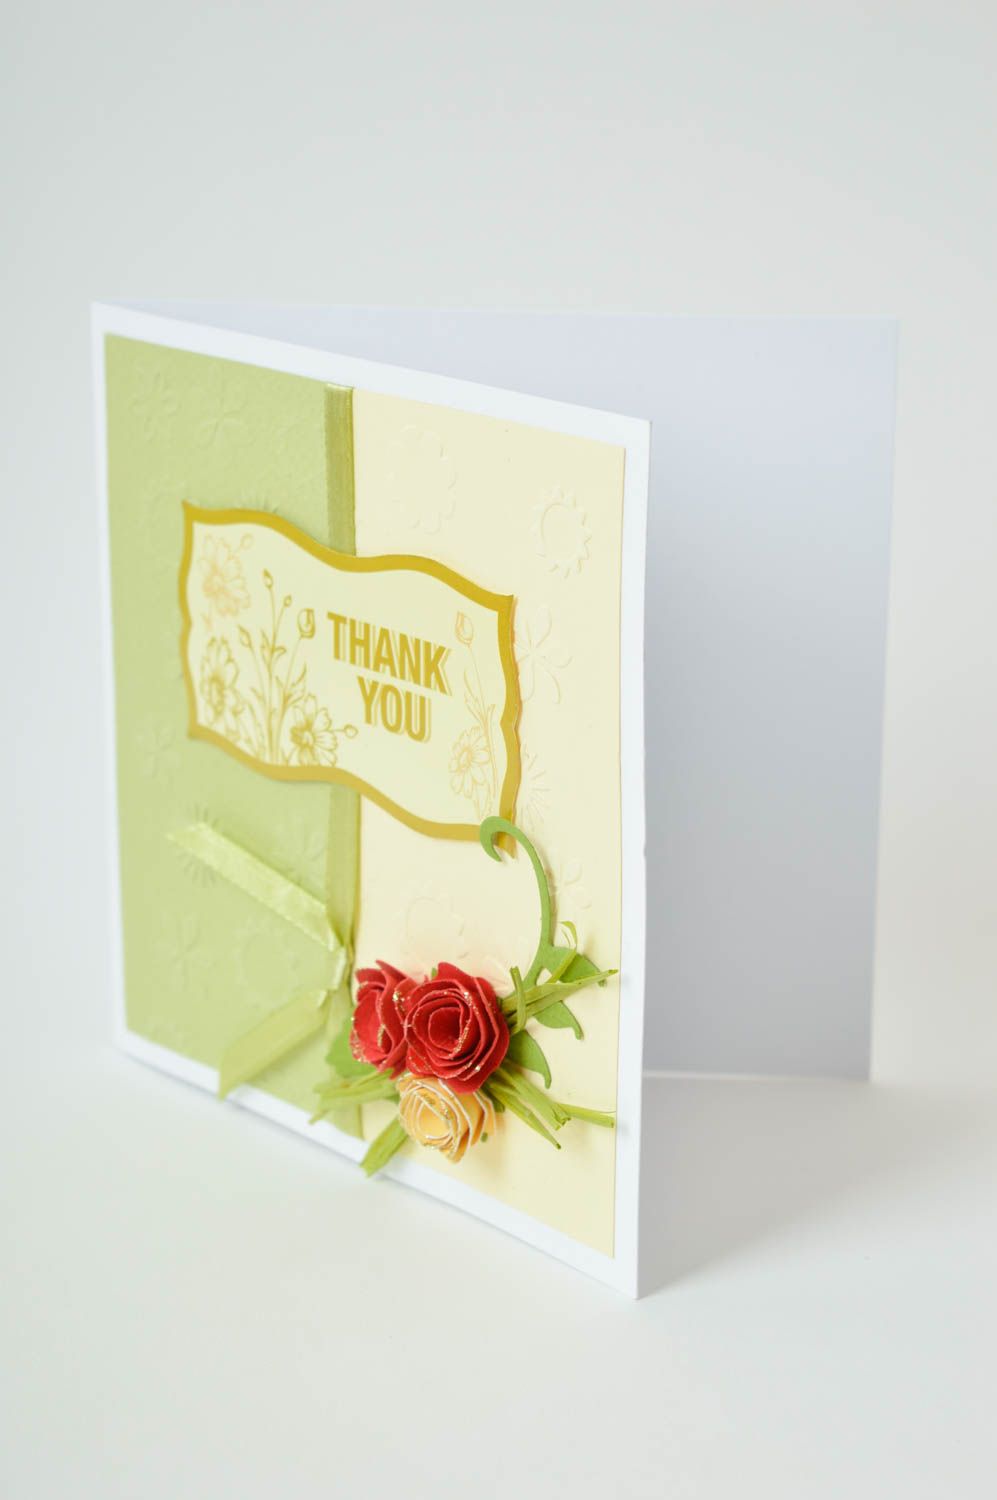 Homemade greeting card thank you card homemade cards souvenir ideas cool gifts photo 4